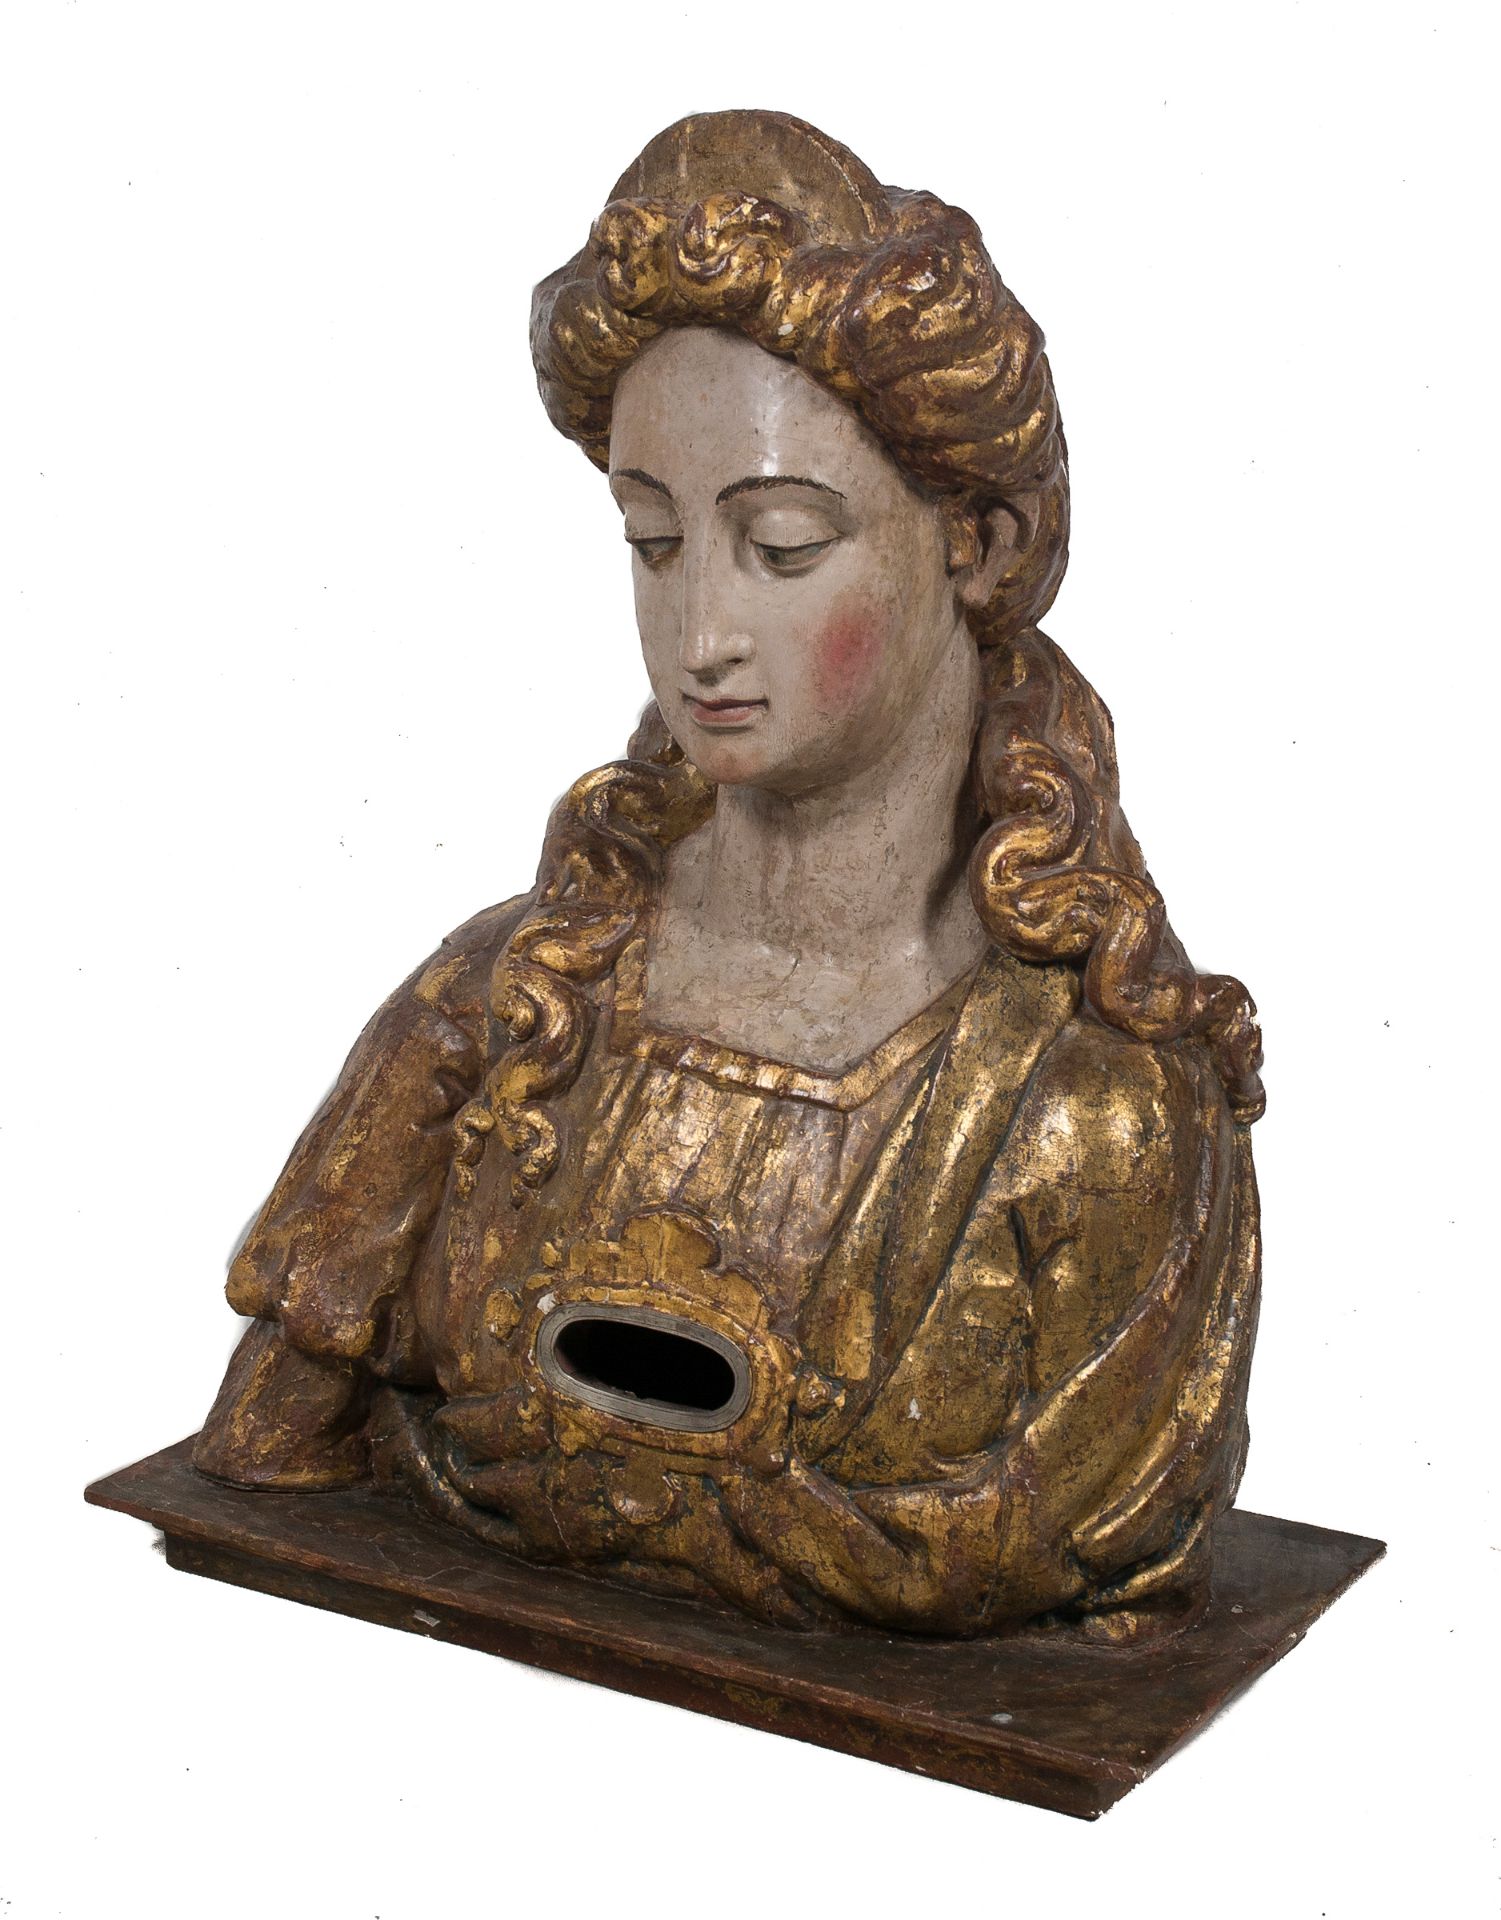 Carved, gilded and polychromed wooden reliquary. 16th century. - Image 3 of 4